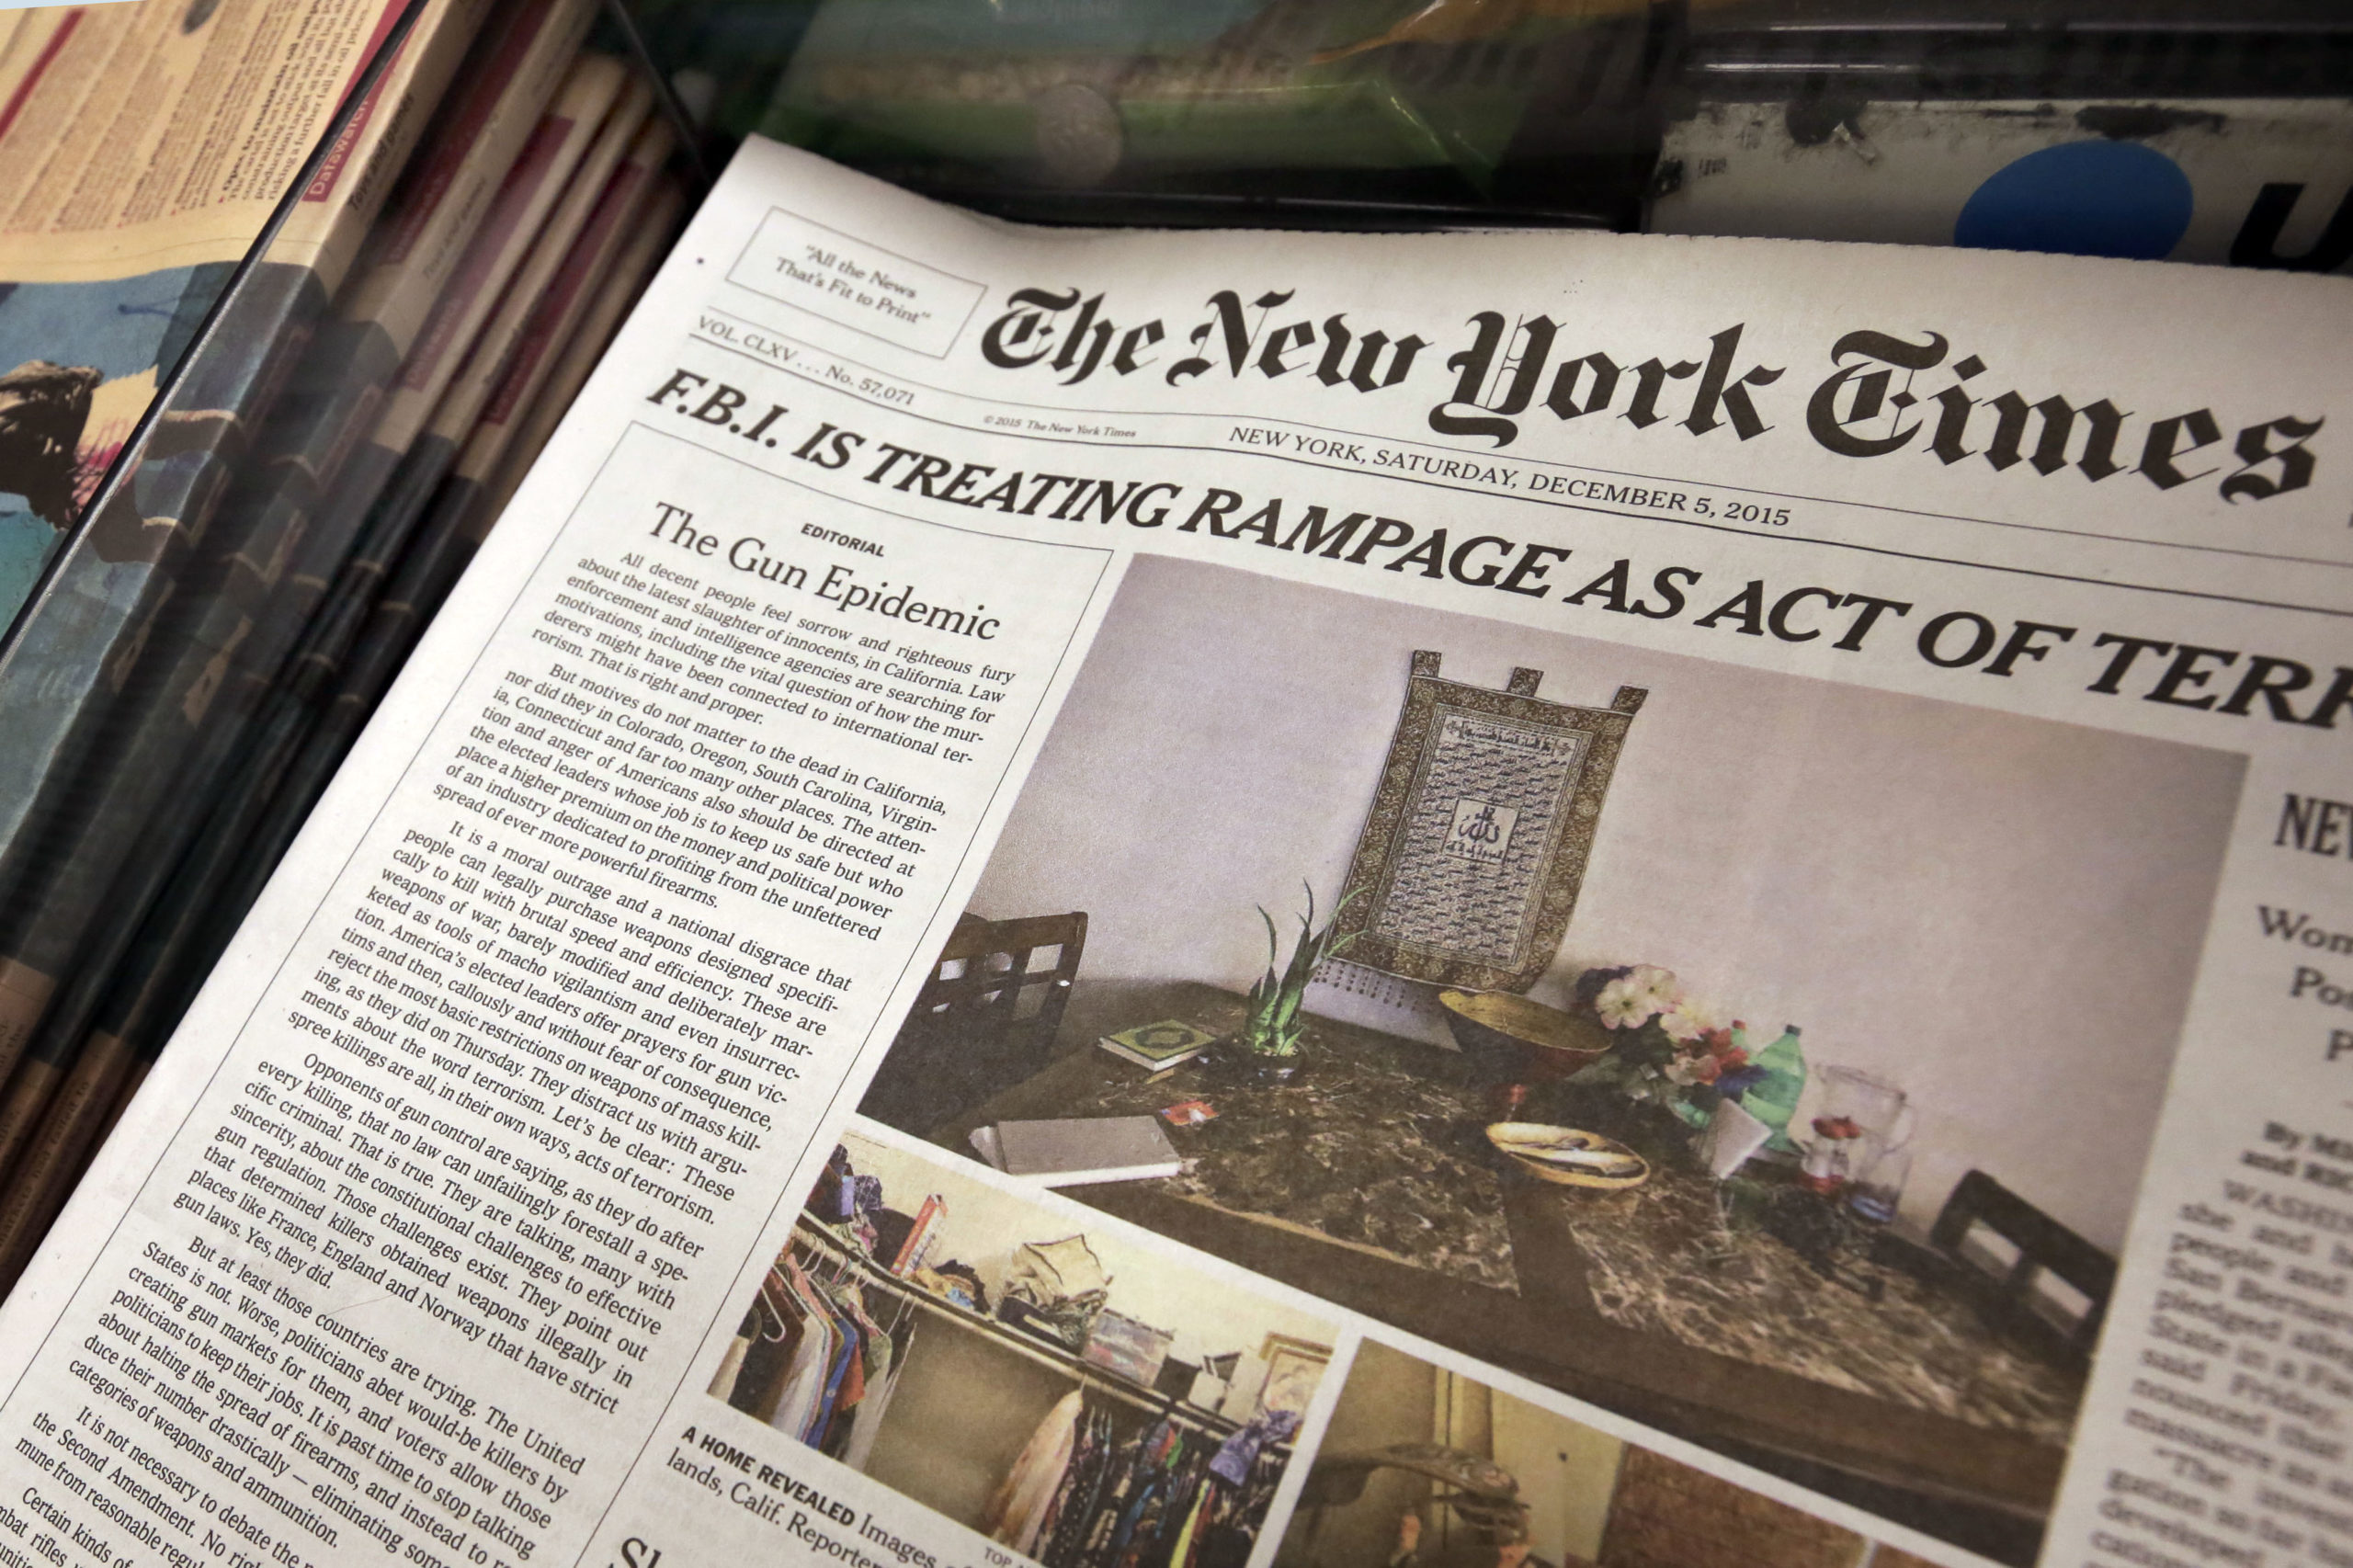 In this photo, an editorial appears on the front page of the New York Times, at a newsstand in New York, Saturday, Dec. 5, 2015. The New York Times is using space on its front page to call for greater gun regulation in the wake of recent deadly mass shootings. Publisher Arthur Sulzberger Jr. says the newspaper is running its first Page 1 editorial since 1920 to "deliver a strong and visible statement of frustration and anguish about our country's inability to come to terms with the scourge of guns." (AP Photo/Richard Drew)